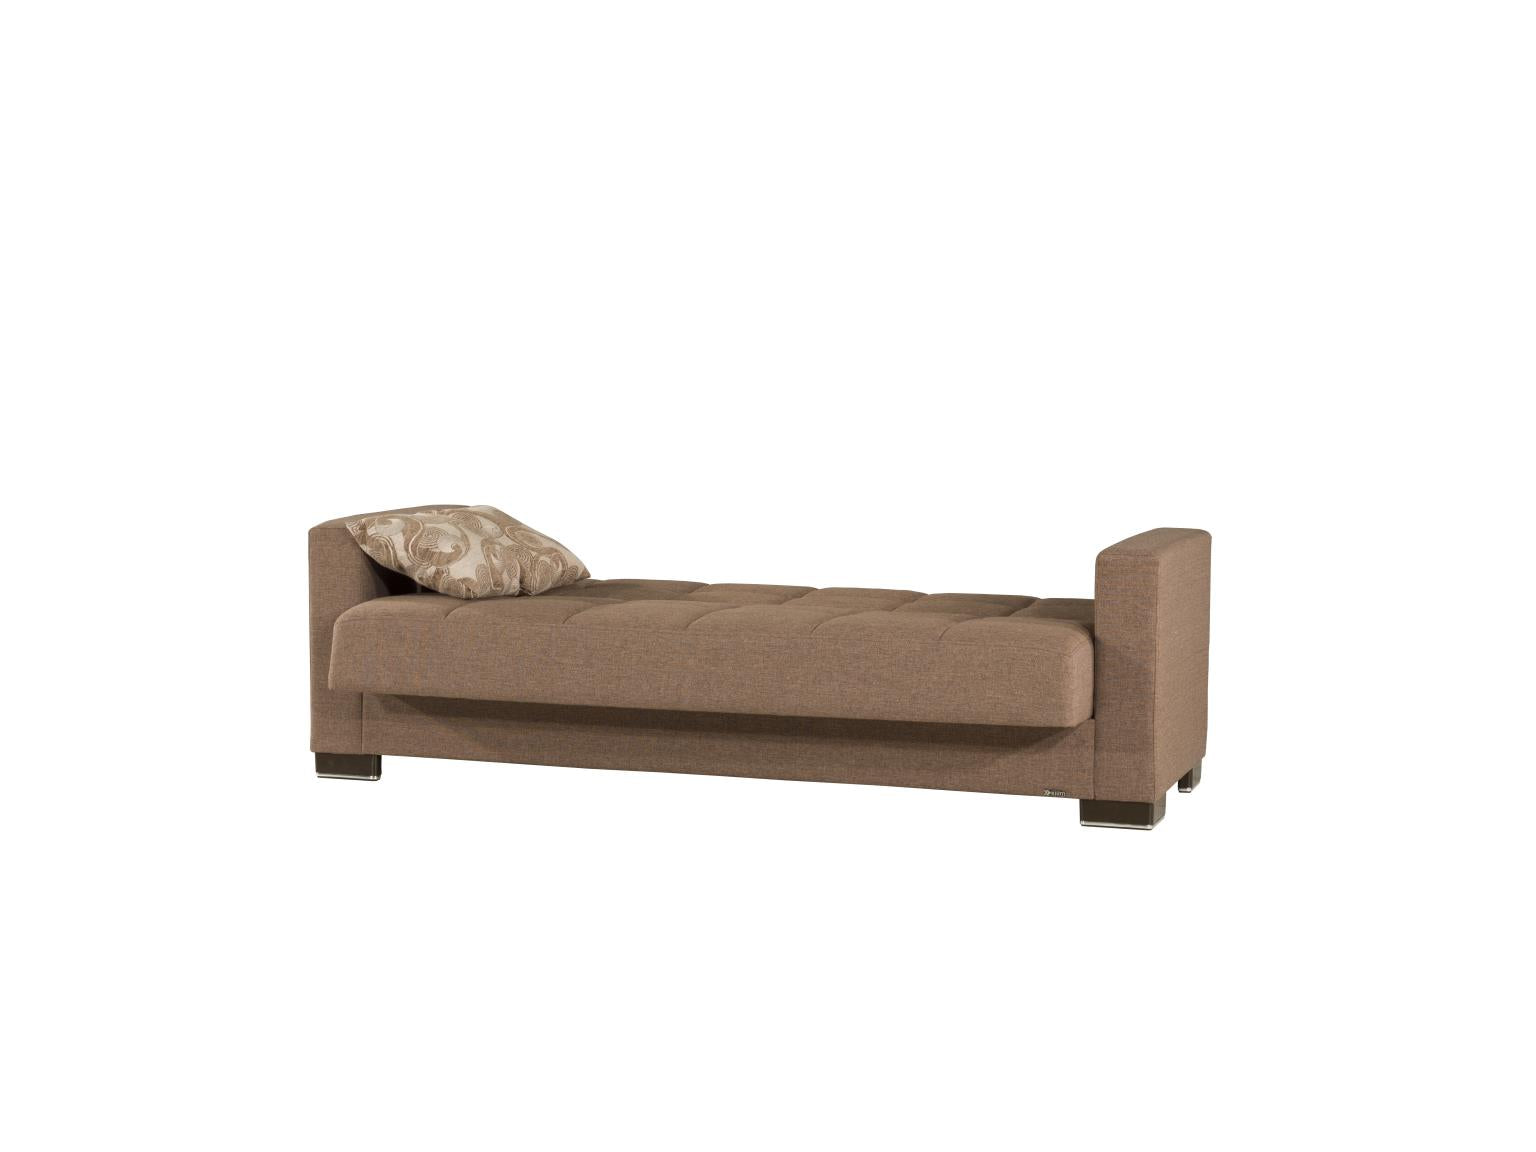 Marco Click Clack Sofa and Loveseat in Light Brown